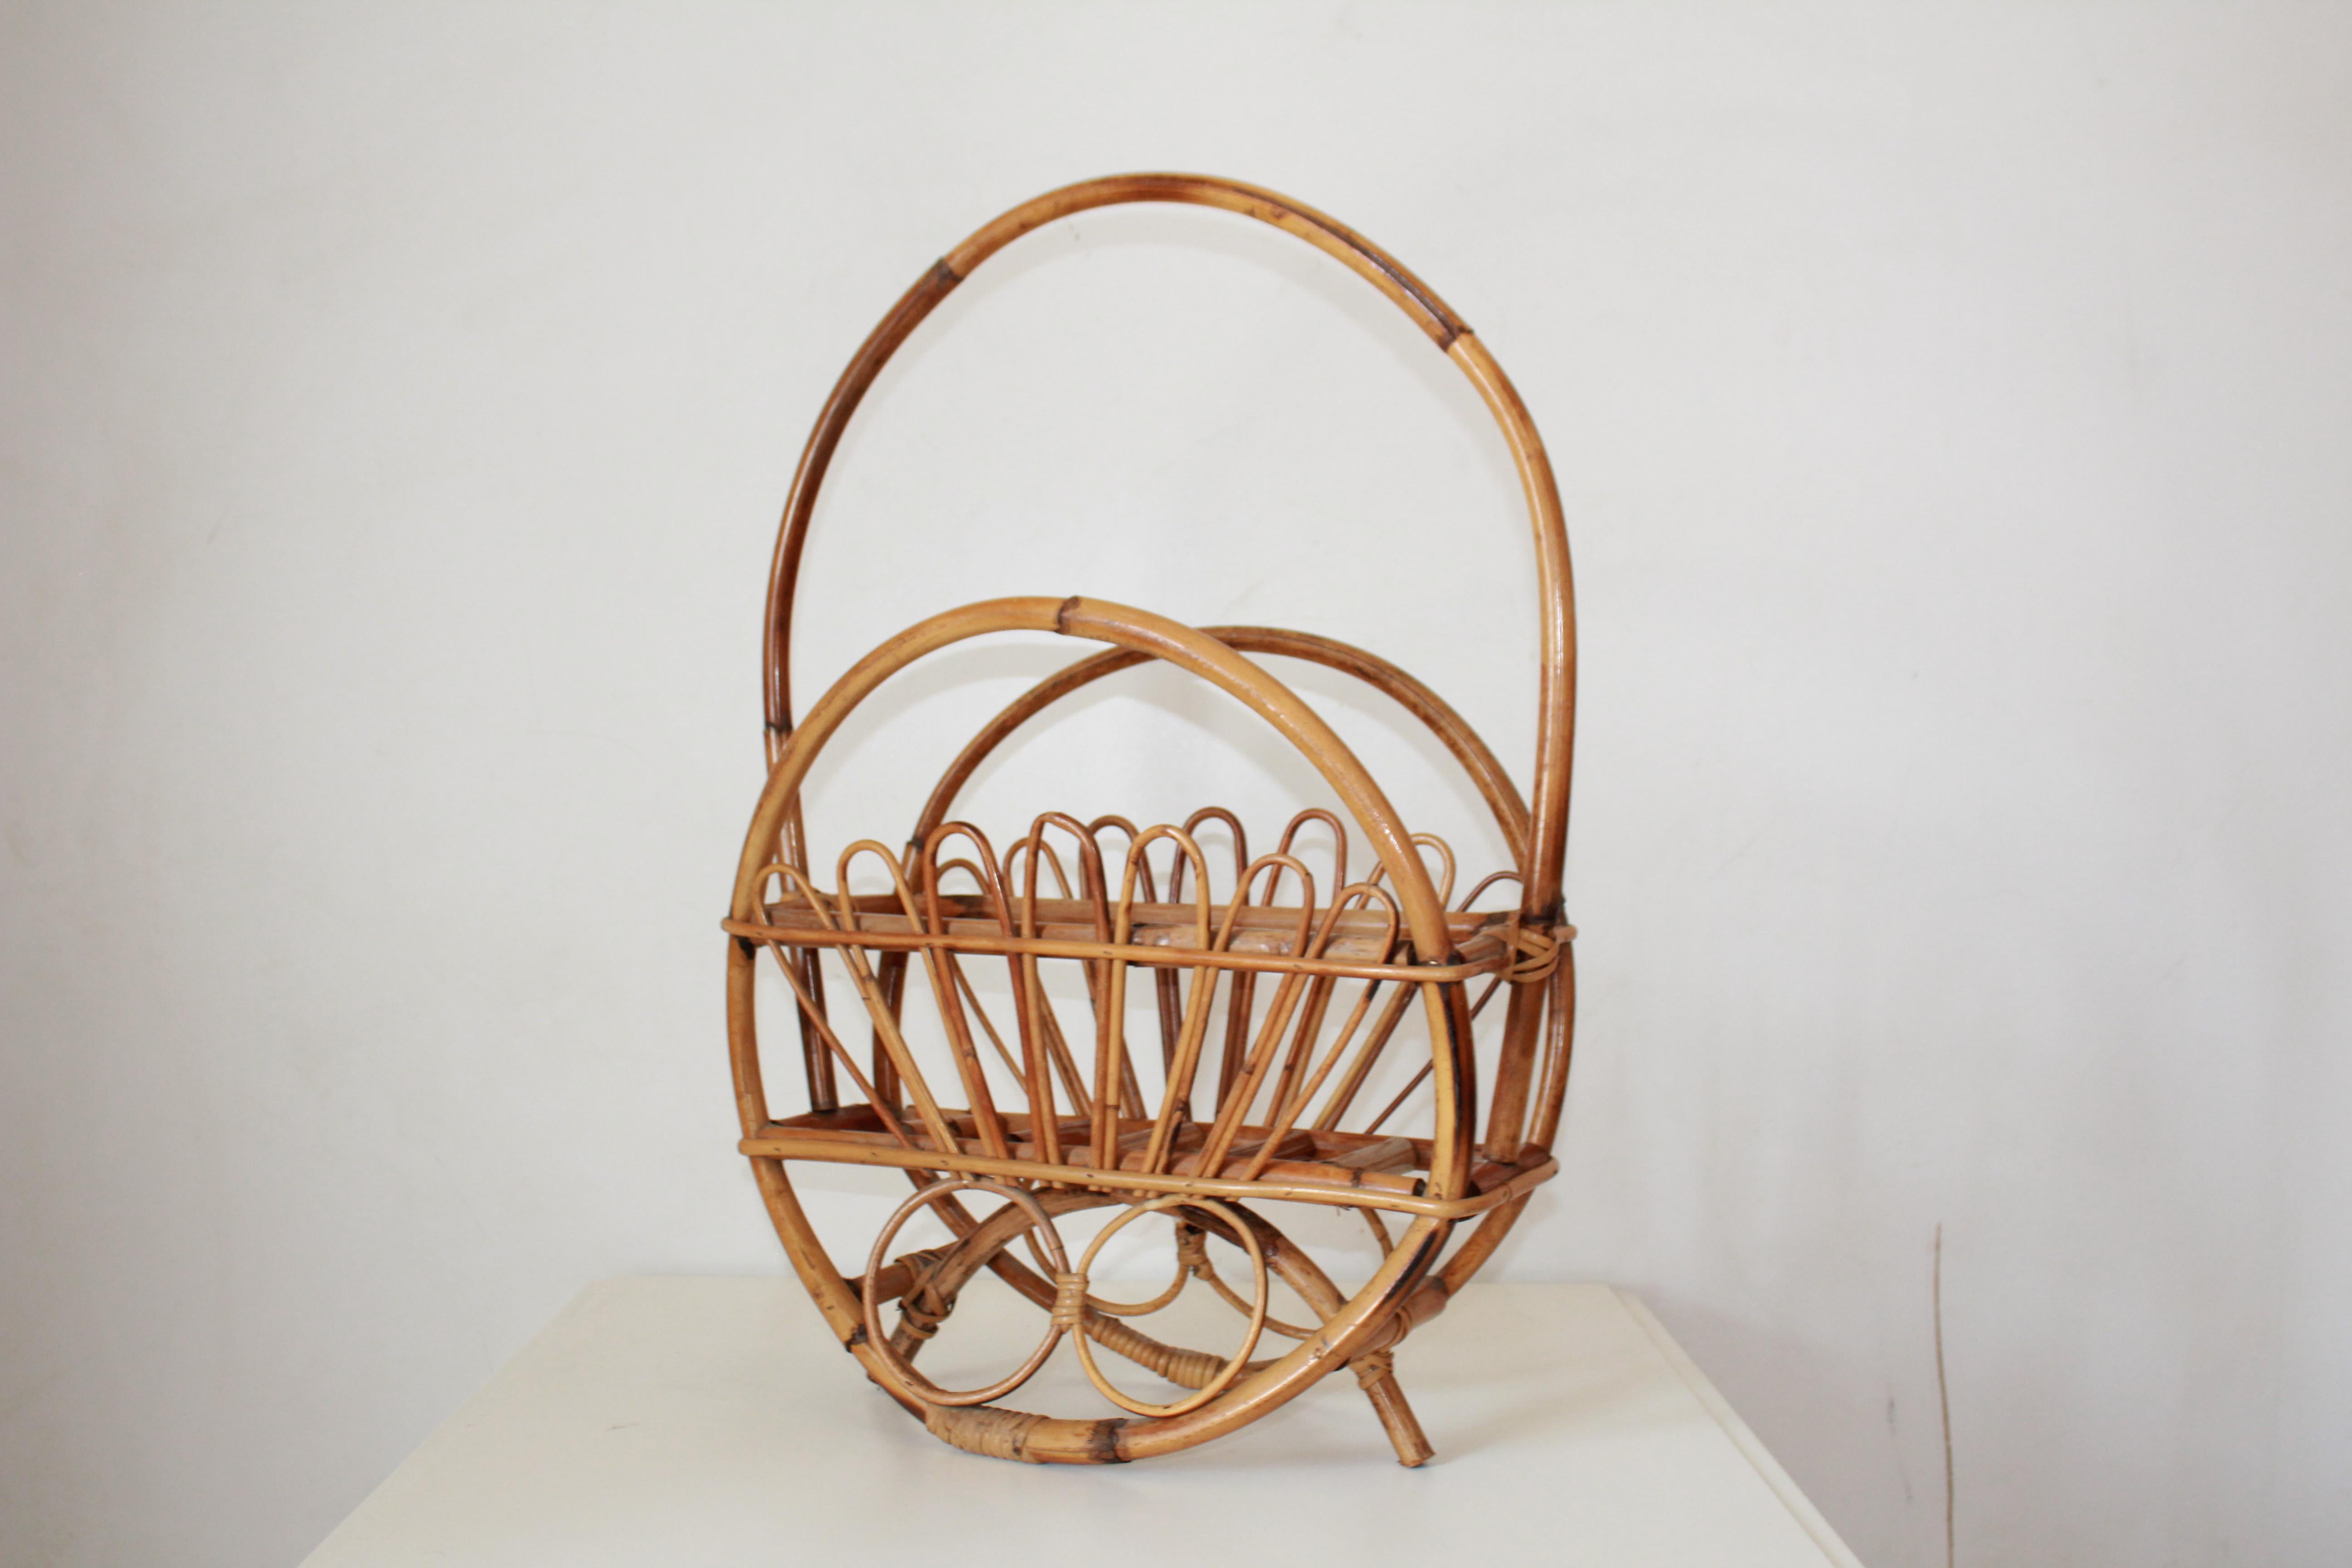 VIntage round magazine rack. Handmade item Produced in Italy in the 1960's.
Beautiful round shaped large bamboo and rattan magazine rack with a bamboo circular handle to hold it. In very good conditions with only few signs fo time.

Size: 
Height: